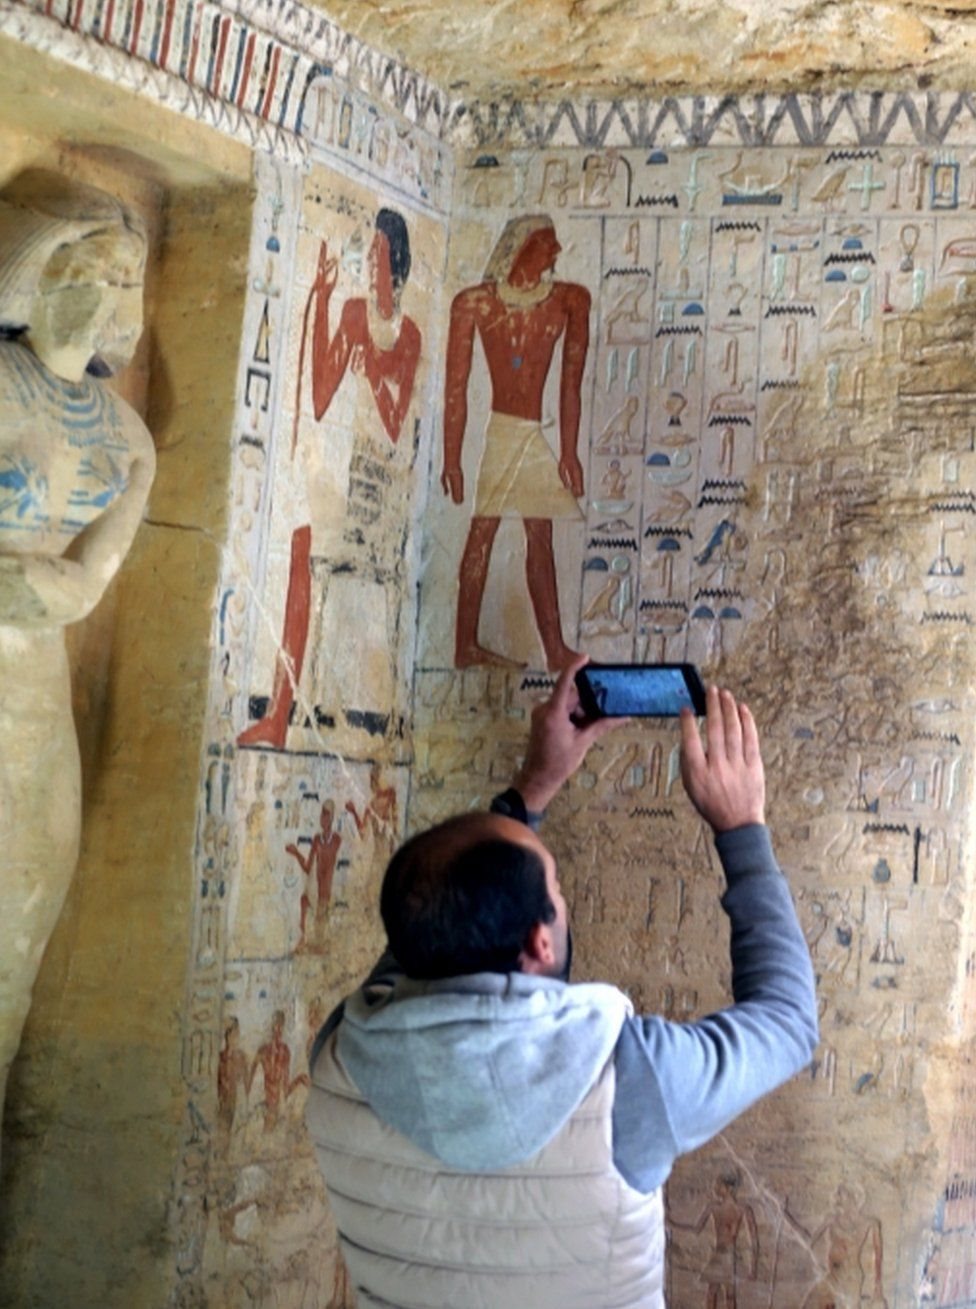 The tomb's colours have survived unusually well for almost 4,400 years, experts said